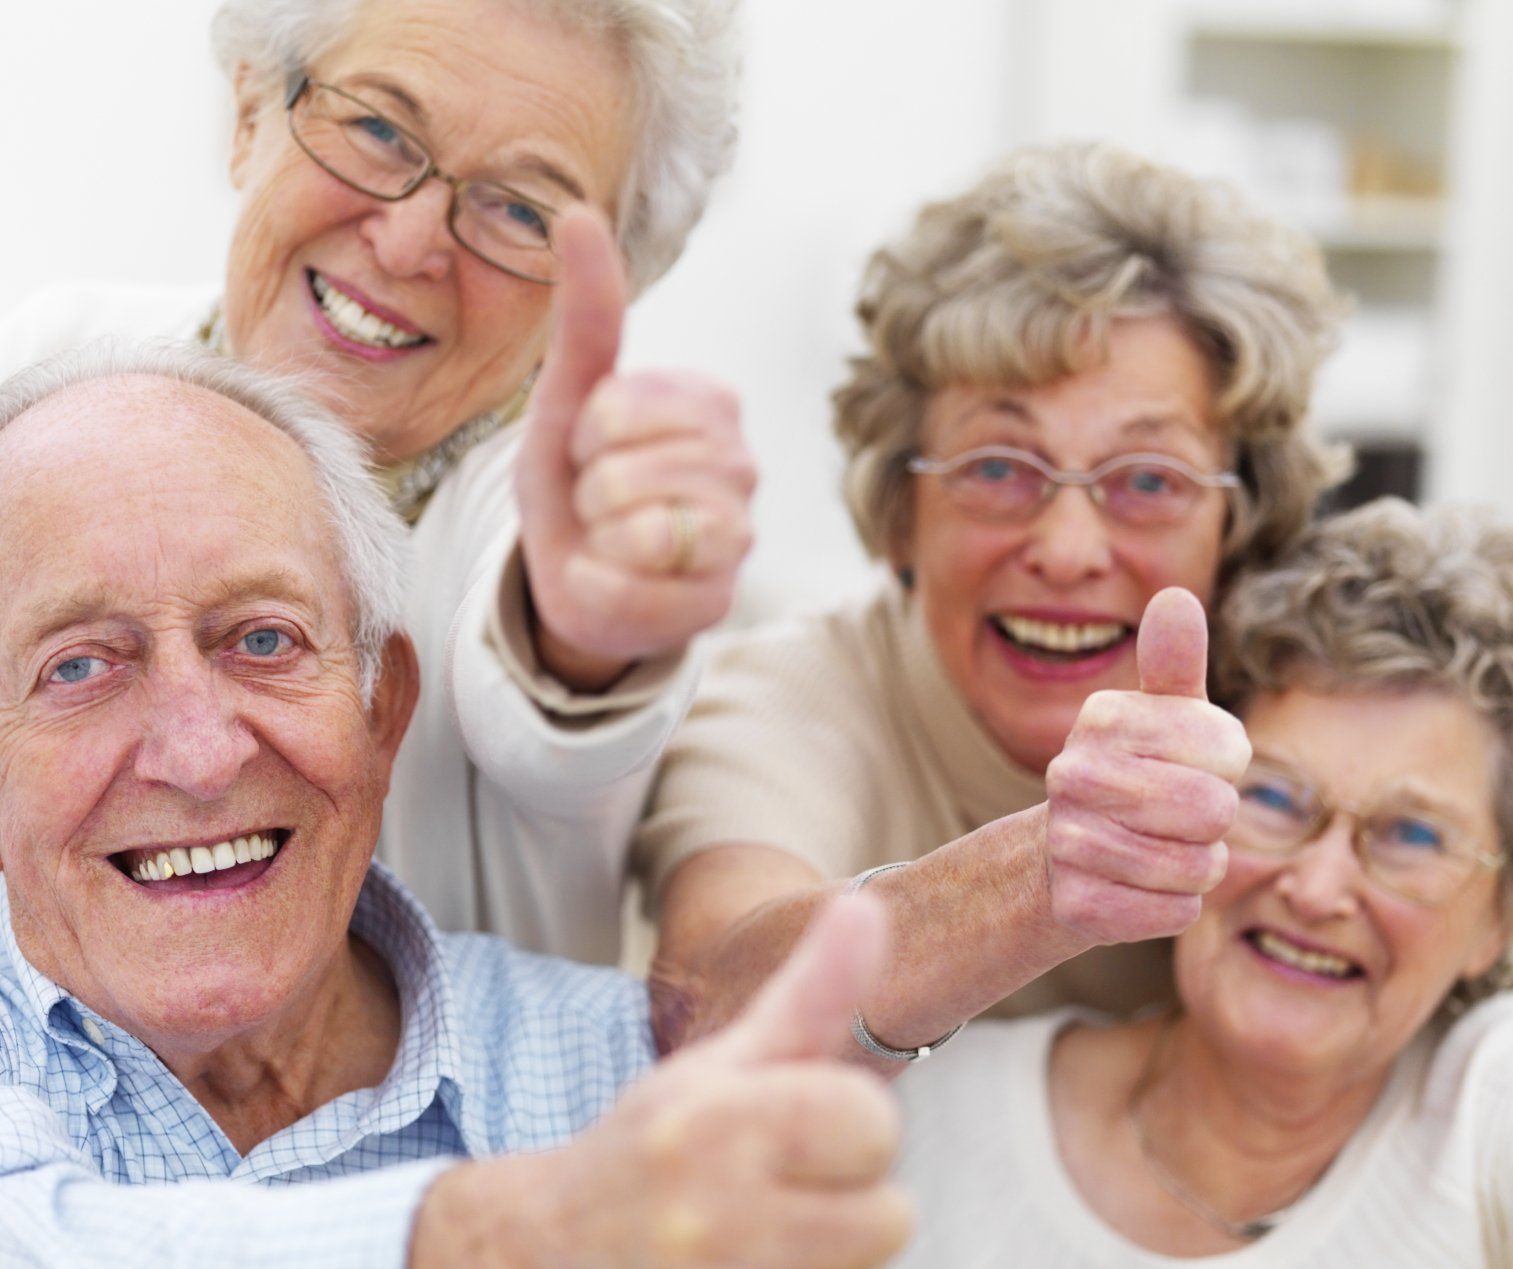 Four senior citizens with broad grins, having a good laugh and giving the thumbs-up sign.